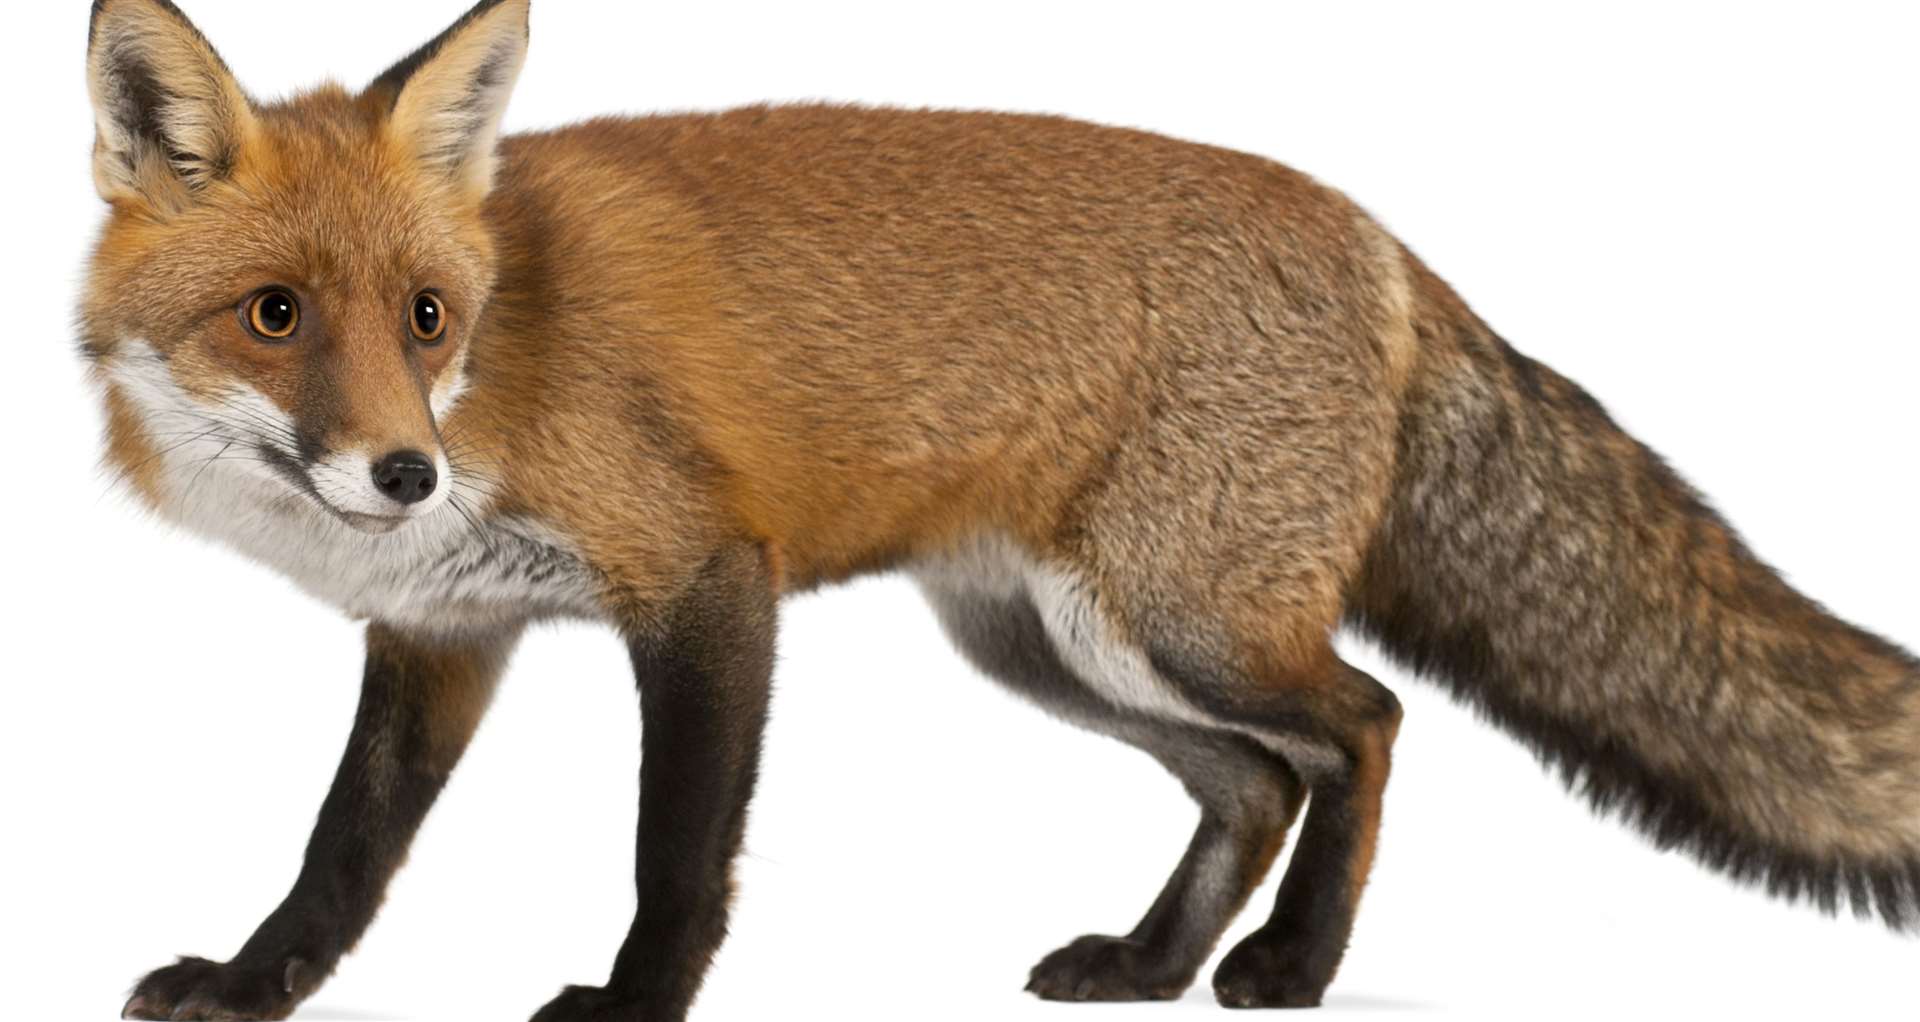 EDF says it follows advice from Natural England about how to capture the foxes